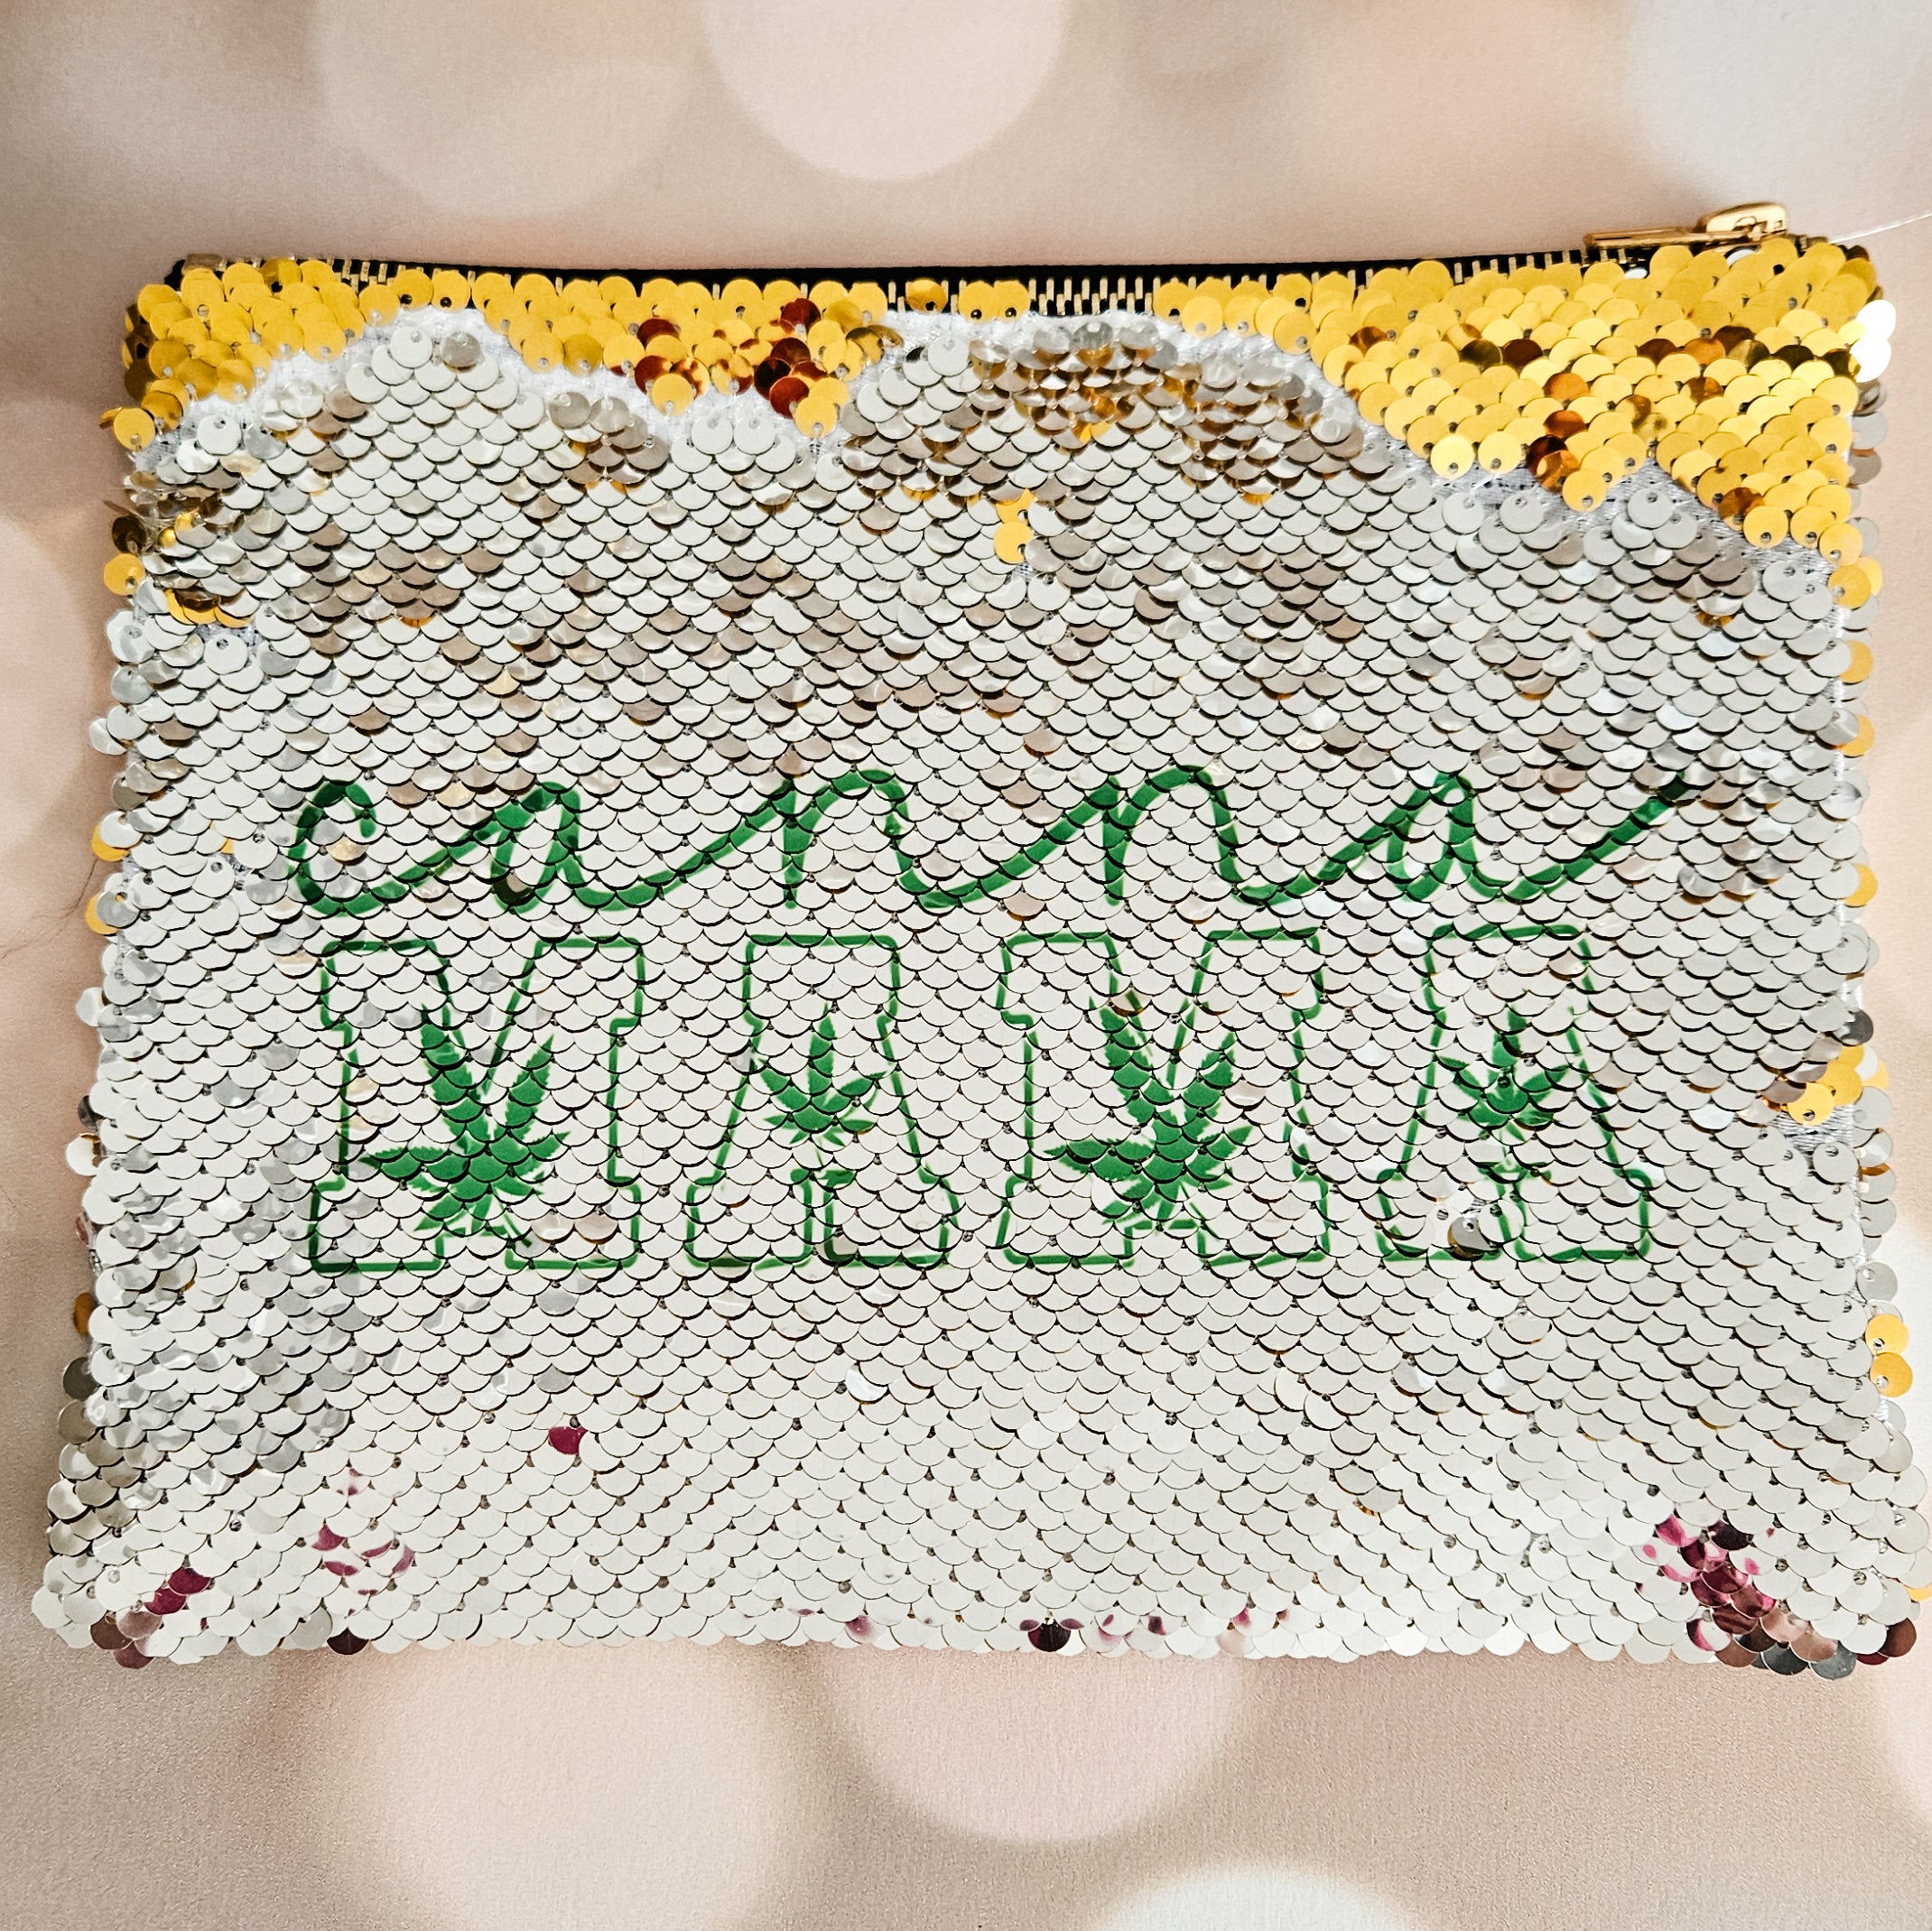 Cannamama 420 Sequin Cosmetic Case - Funny Weed Storage Pouch for Mom Salt and Sparkle